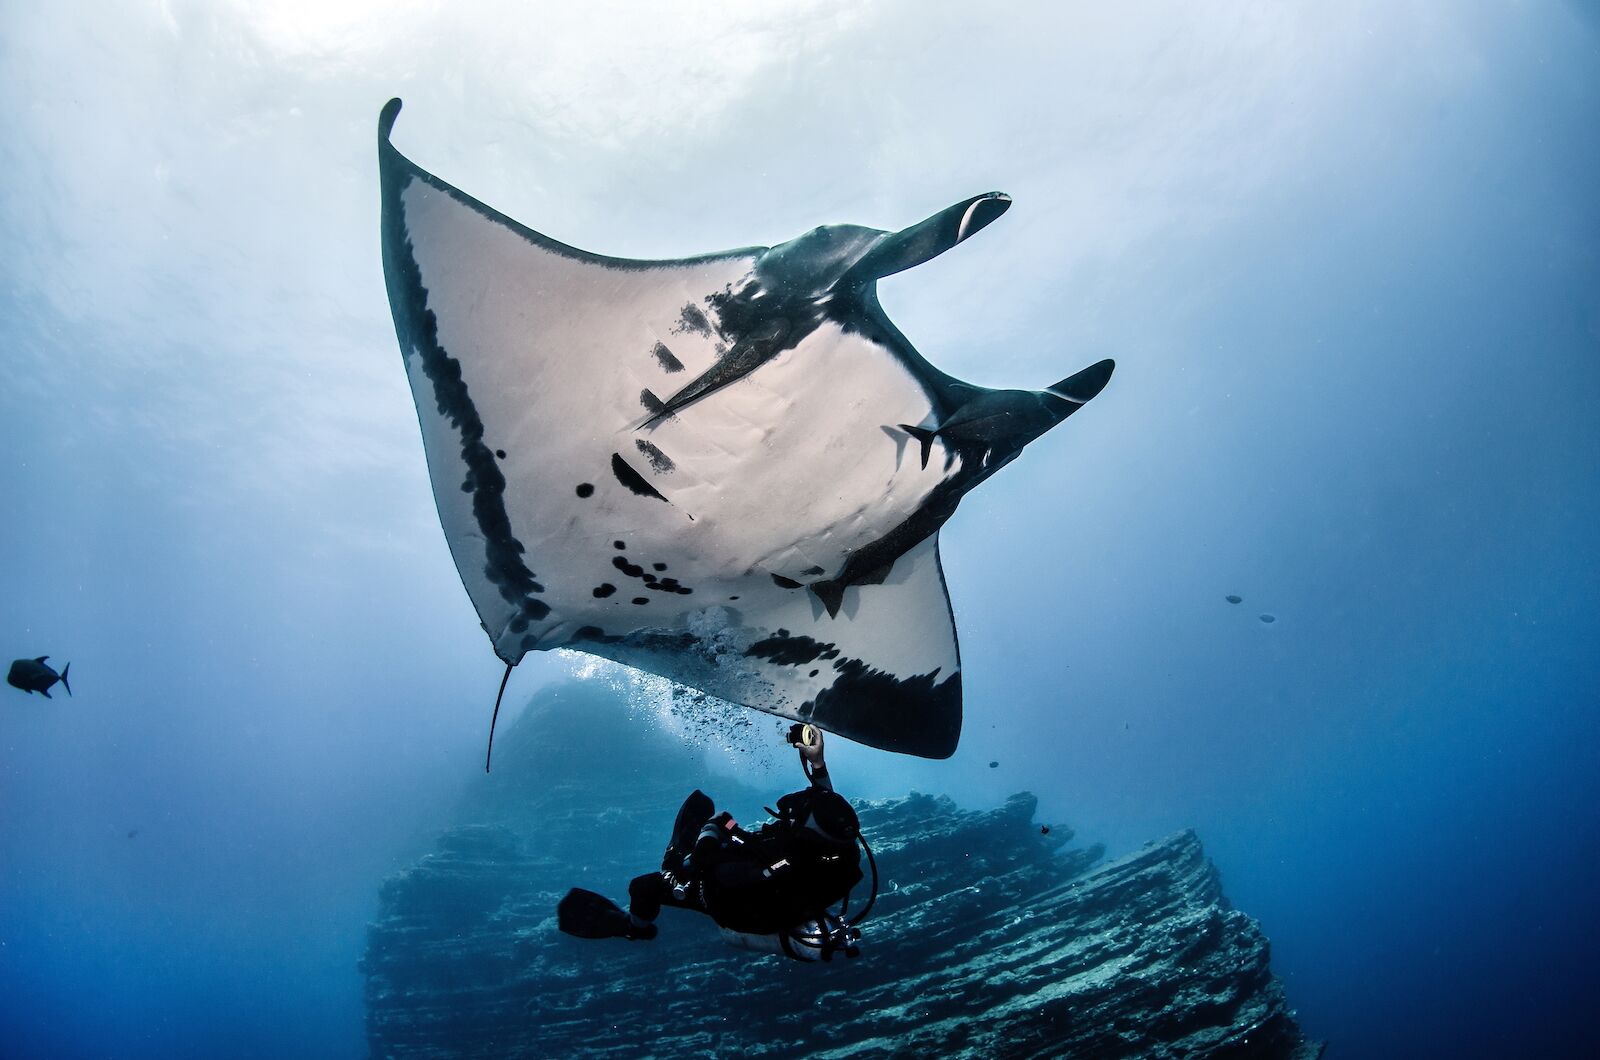 Giant Manta Ray swimming with scuba diver